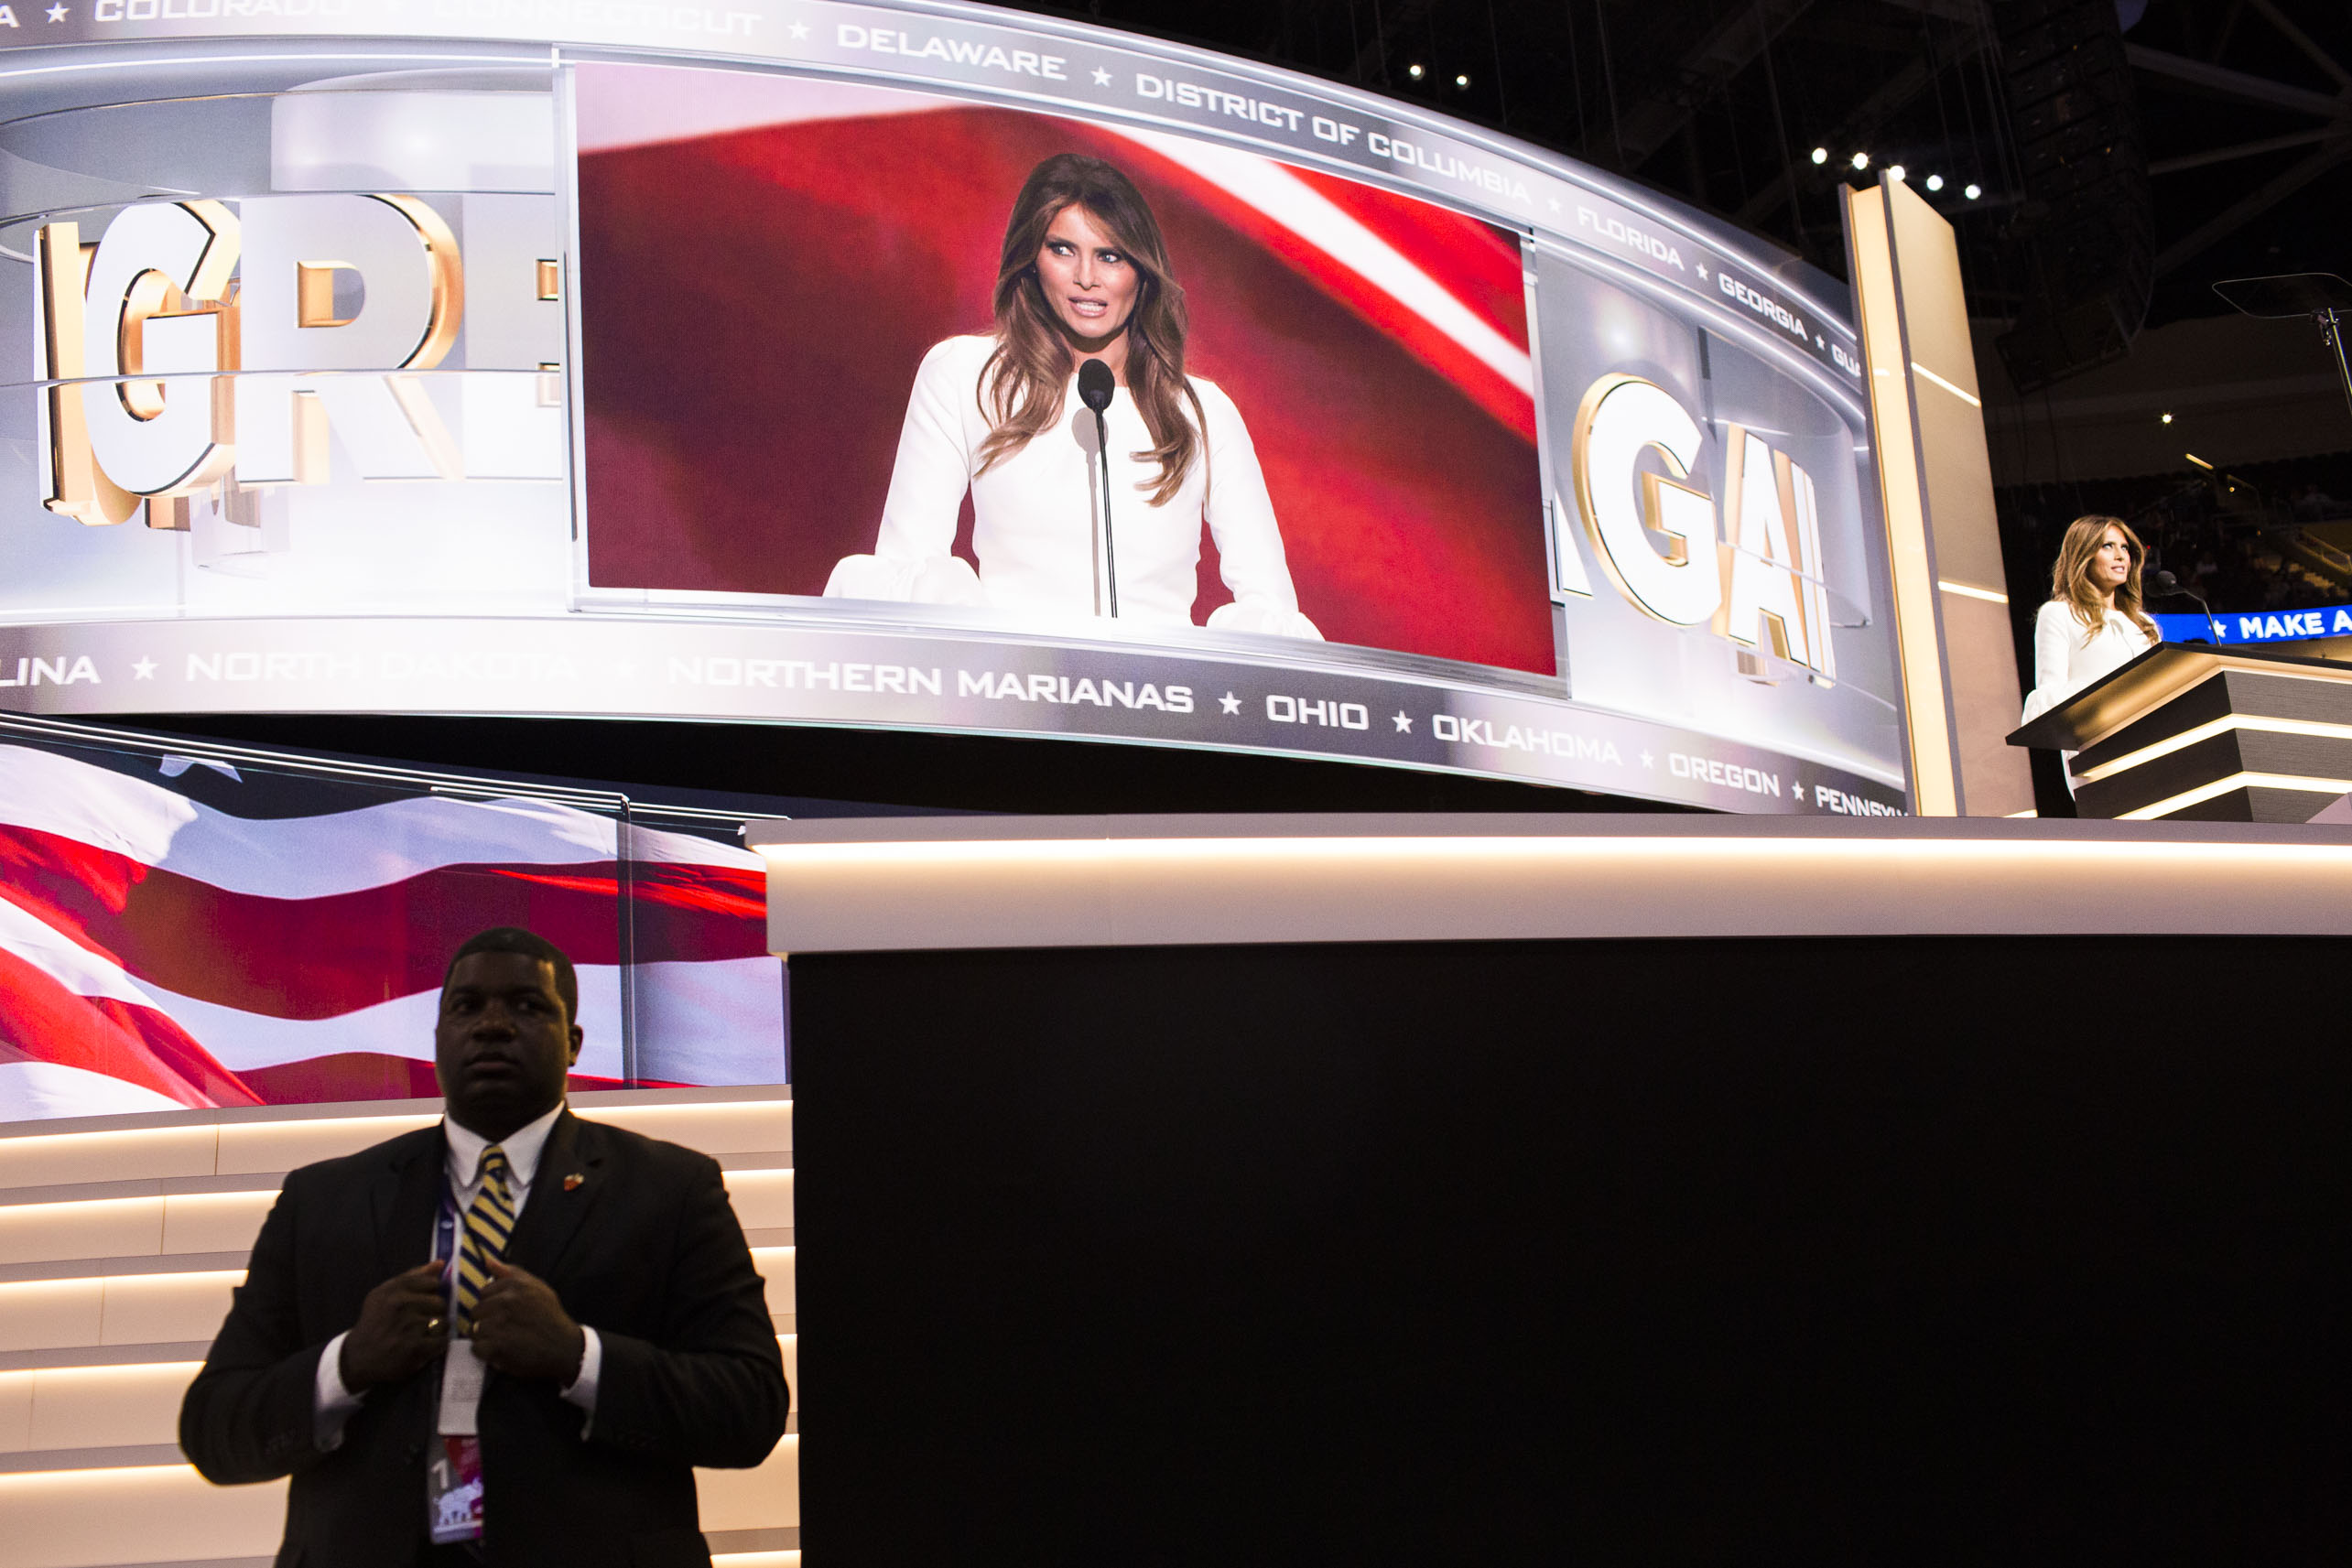 Melania Trump speaks to the crowd at the 2016 Republican National Convention on Monday, July 18, 2016, in Cleveland. (Landon Nordeman for TIME)